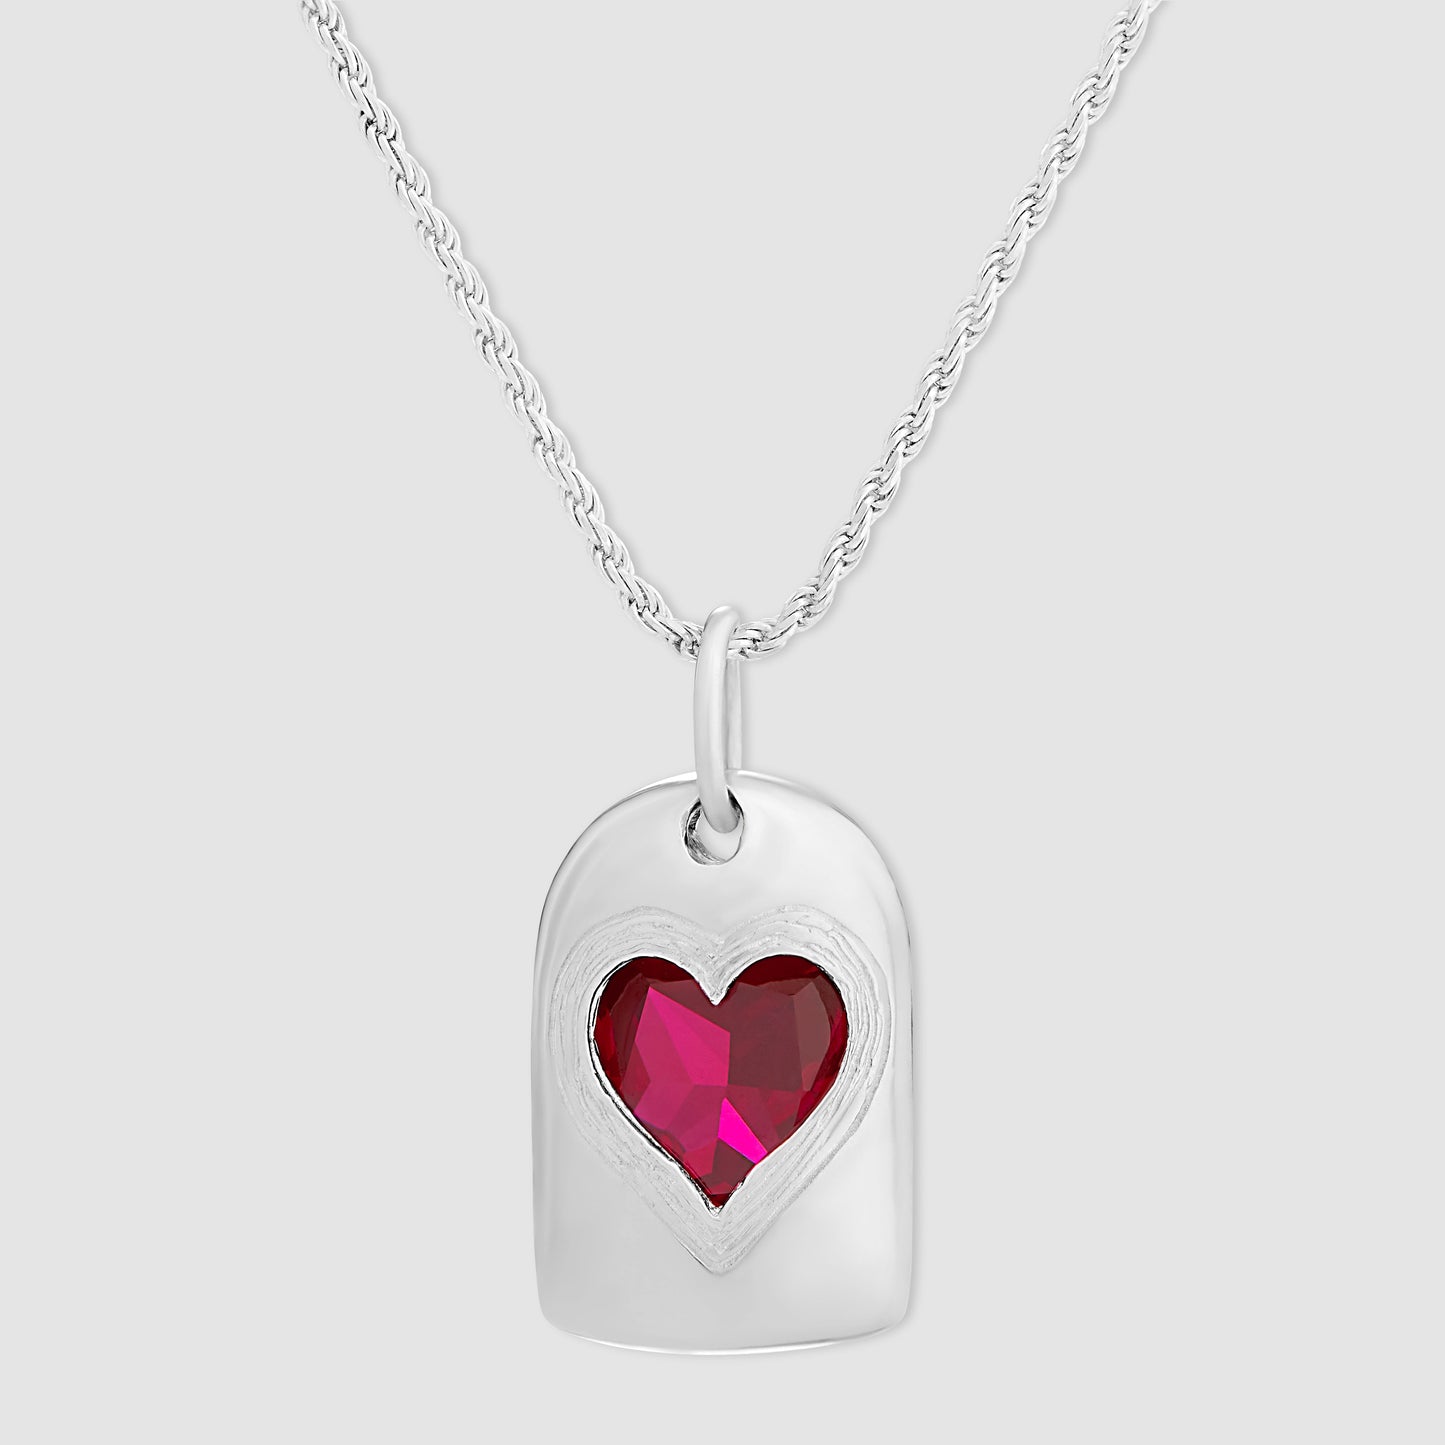 Lovers Pendant - Silver